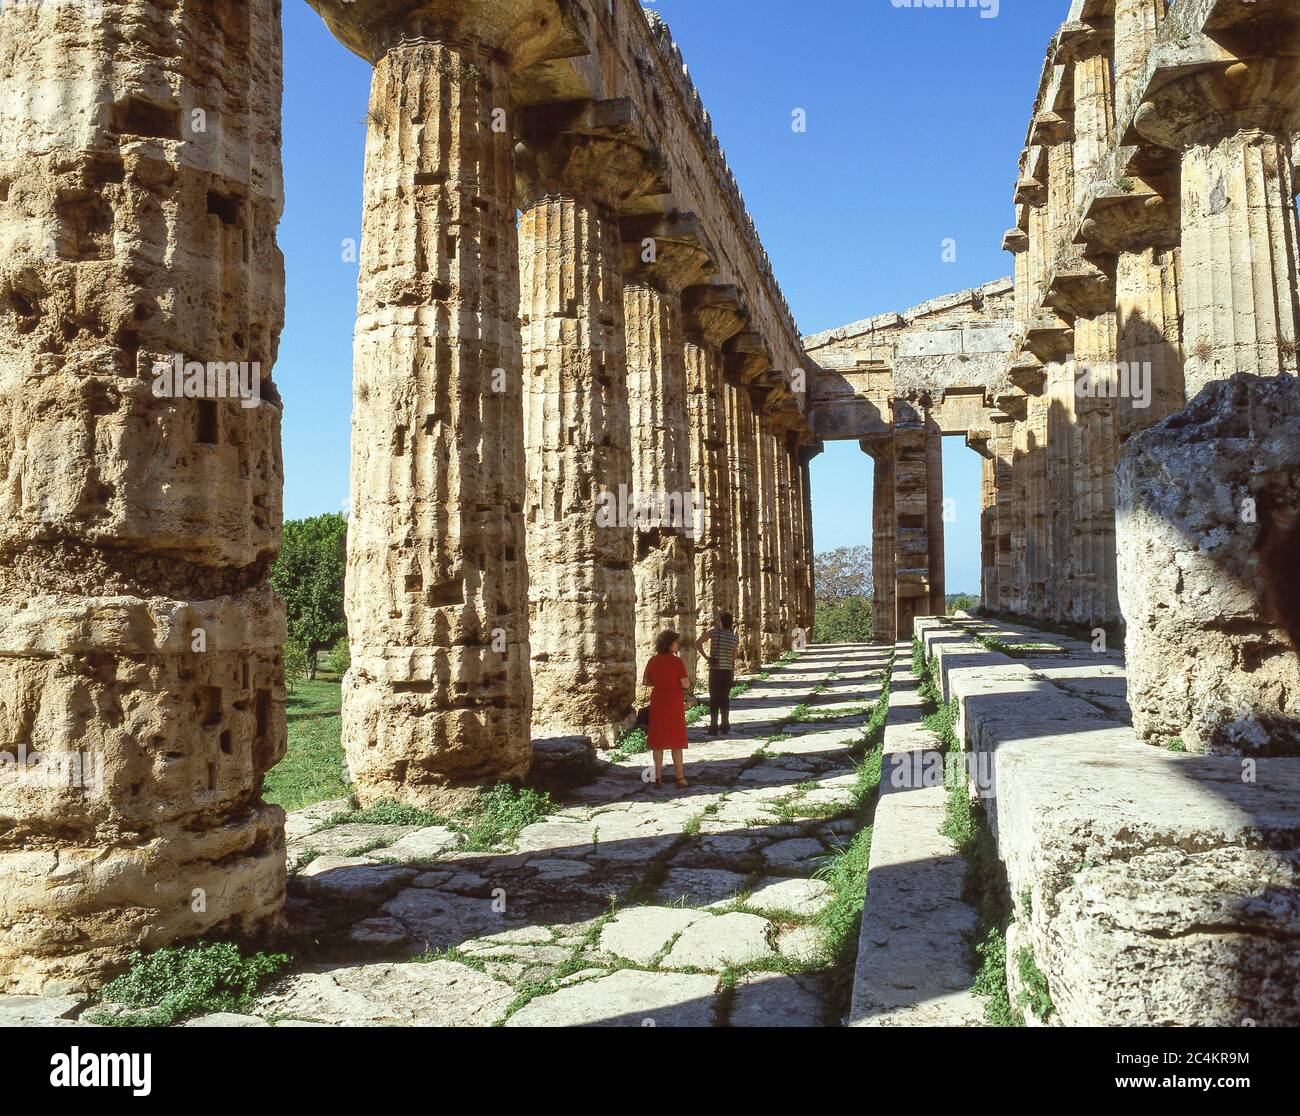 Interior of The First temple of Hera, Paestum, Province of Salerno, Campania Region, Italy Stock Photo